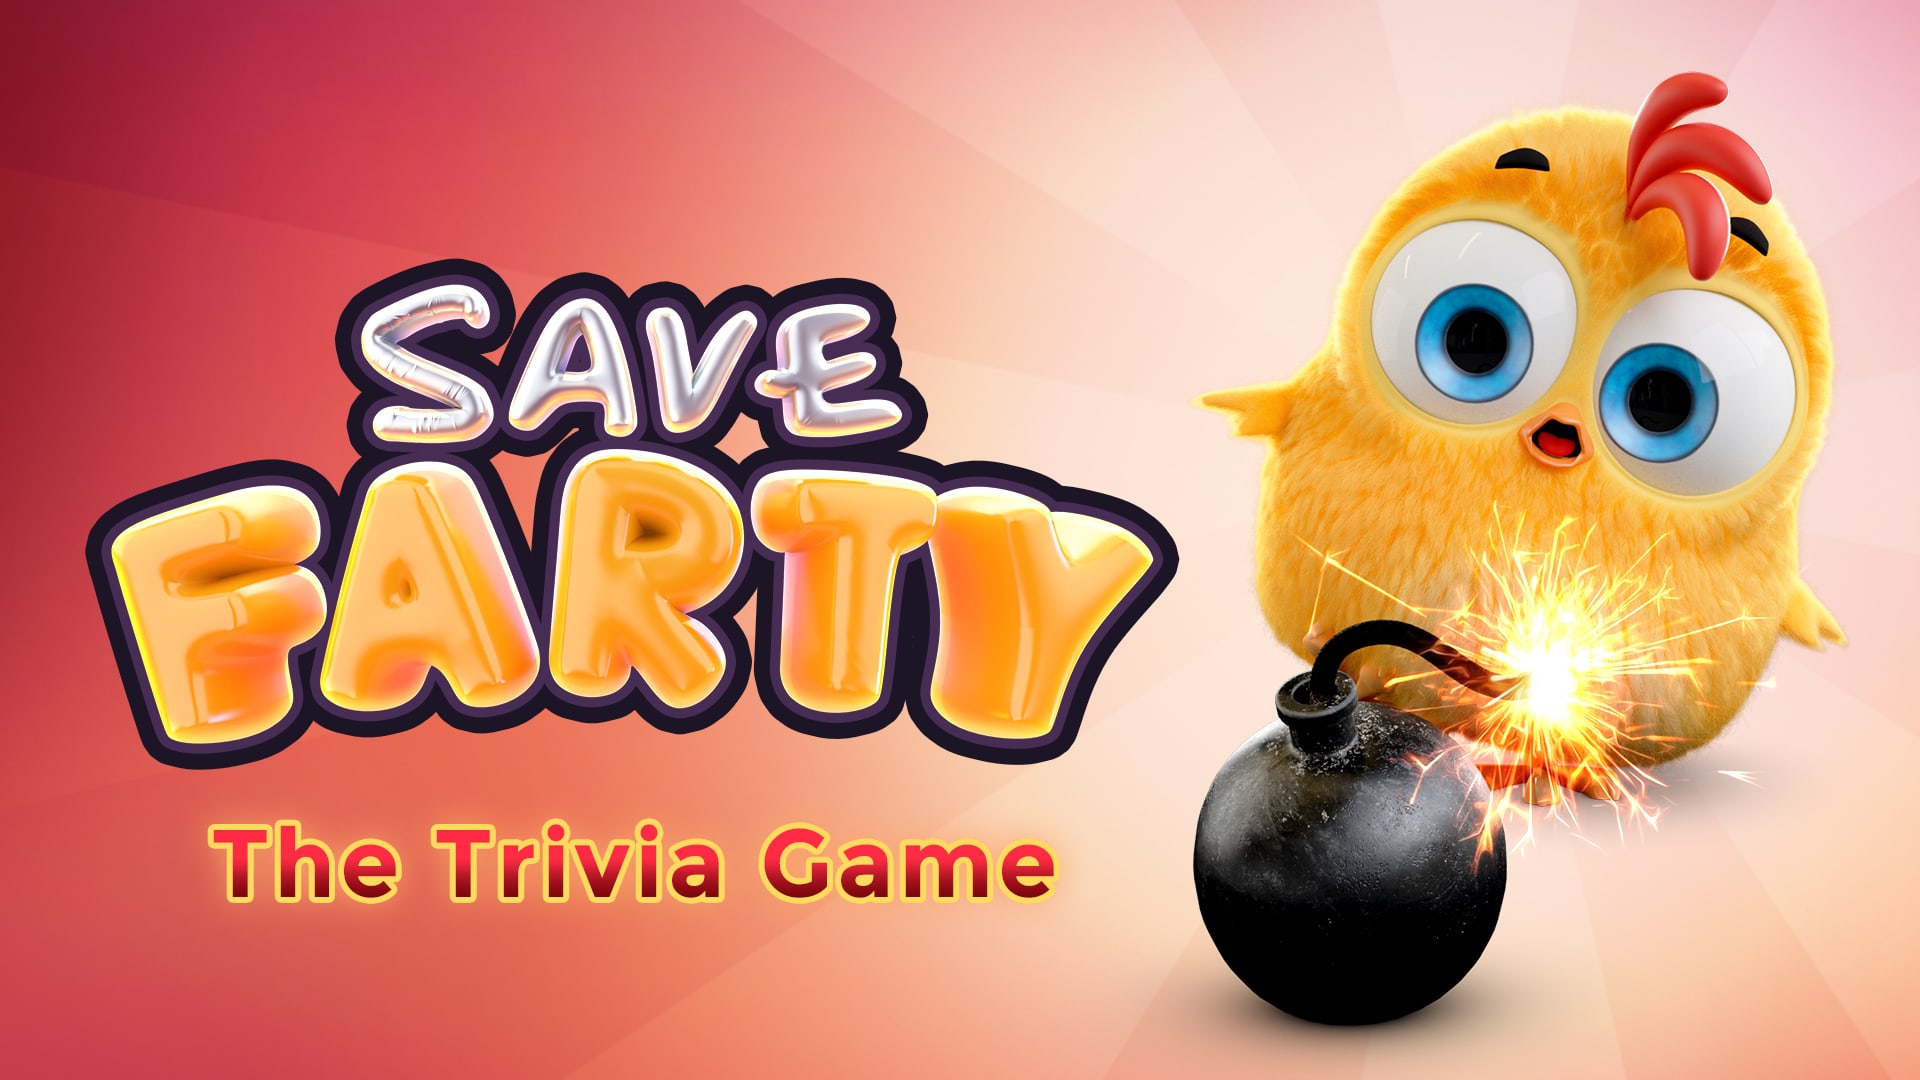 Save Farty – the Trivia Game